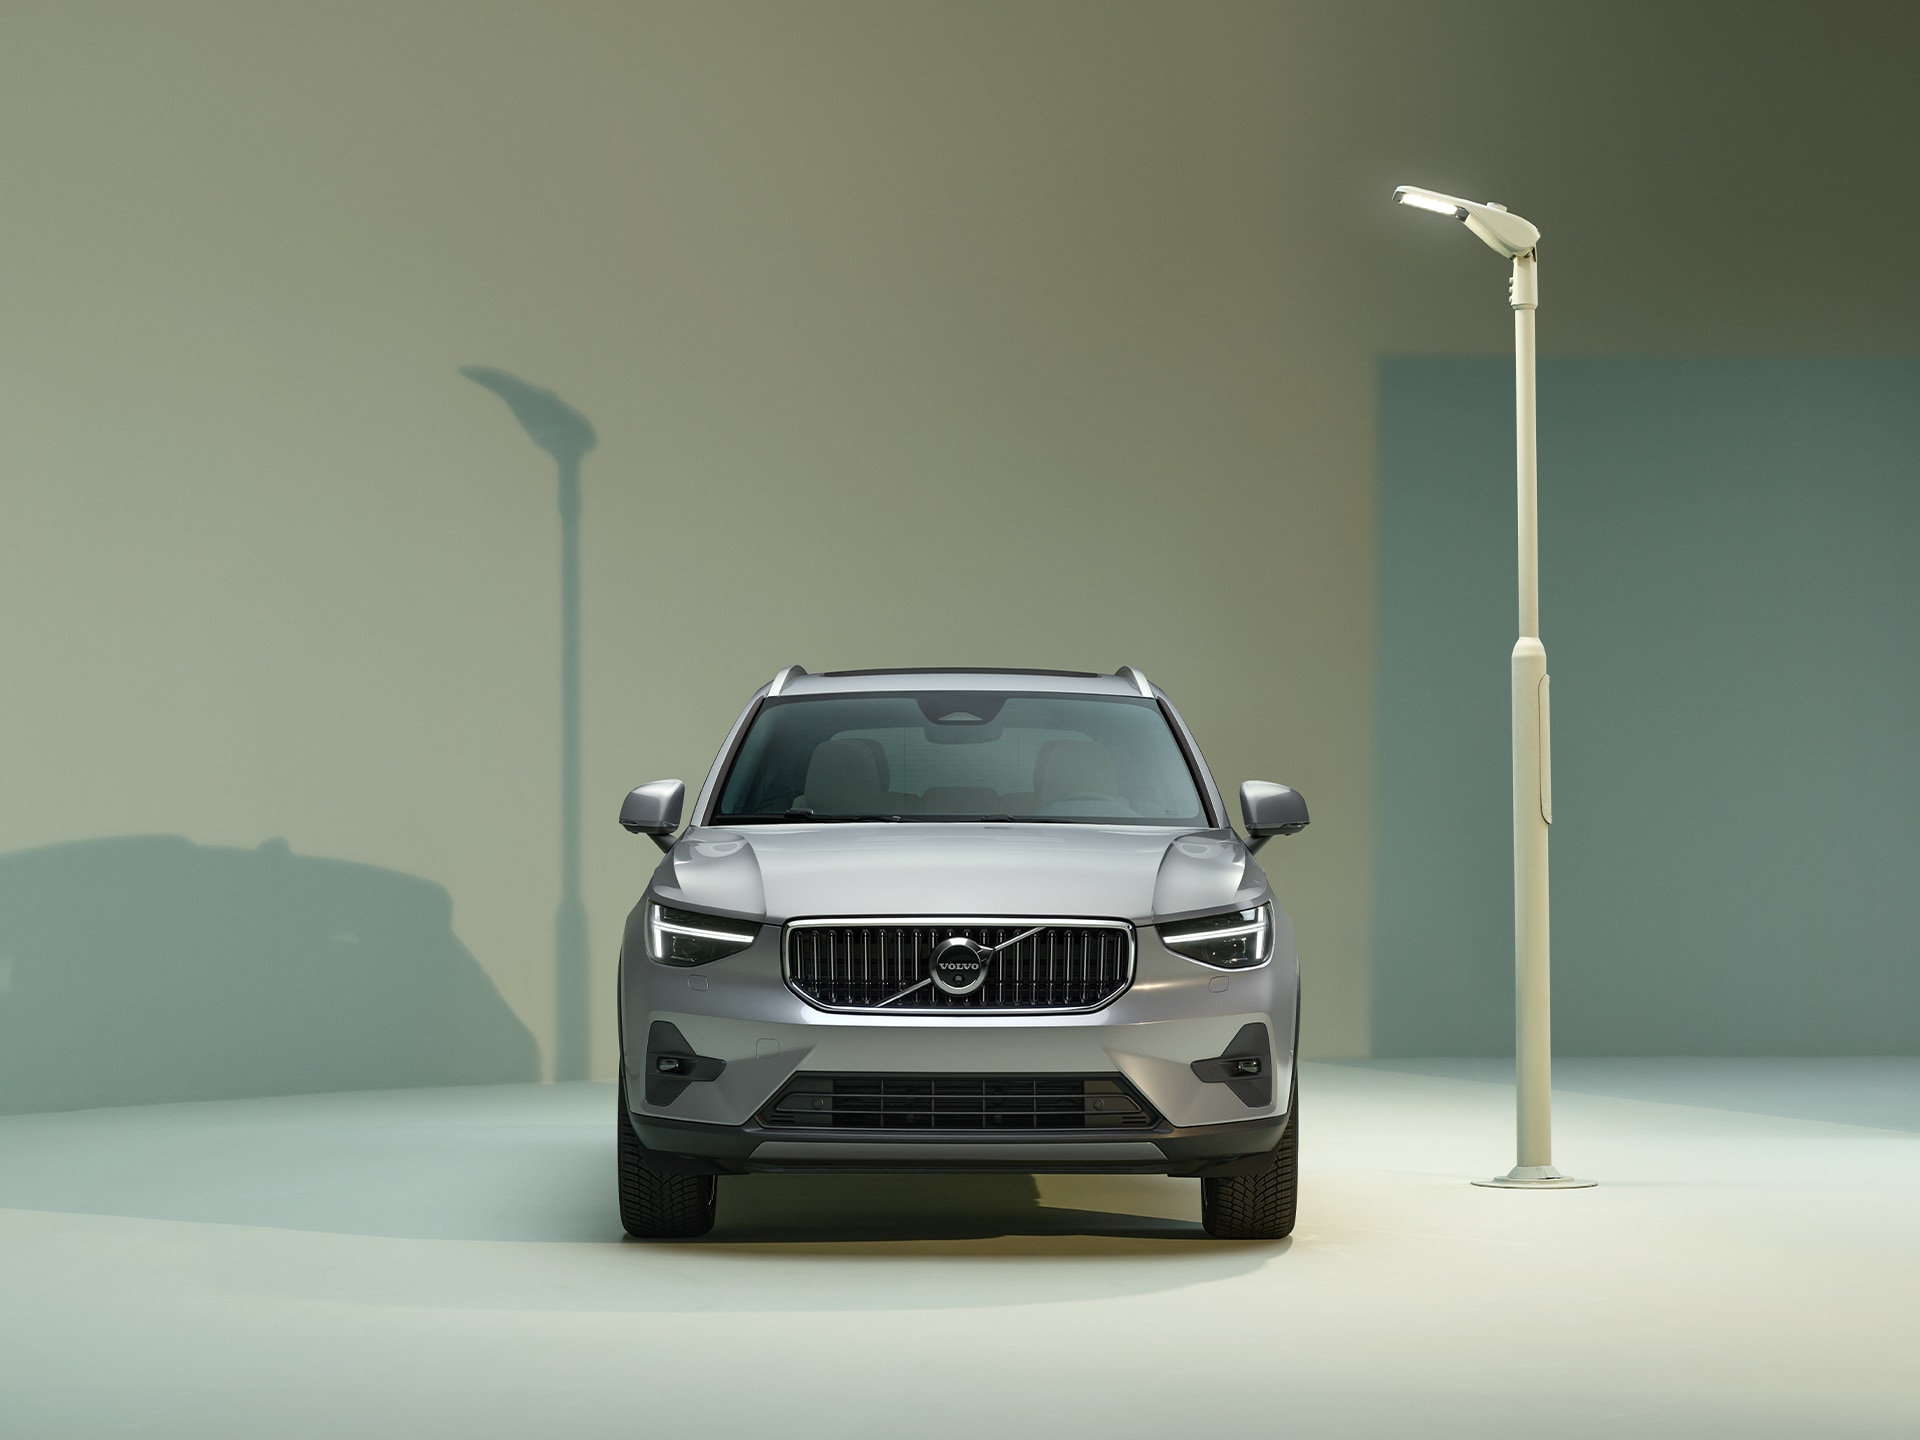 Refreshed exterior design details on the Volvo XC40 SUV.